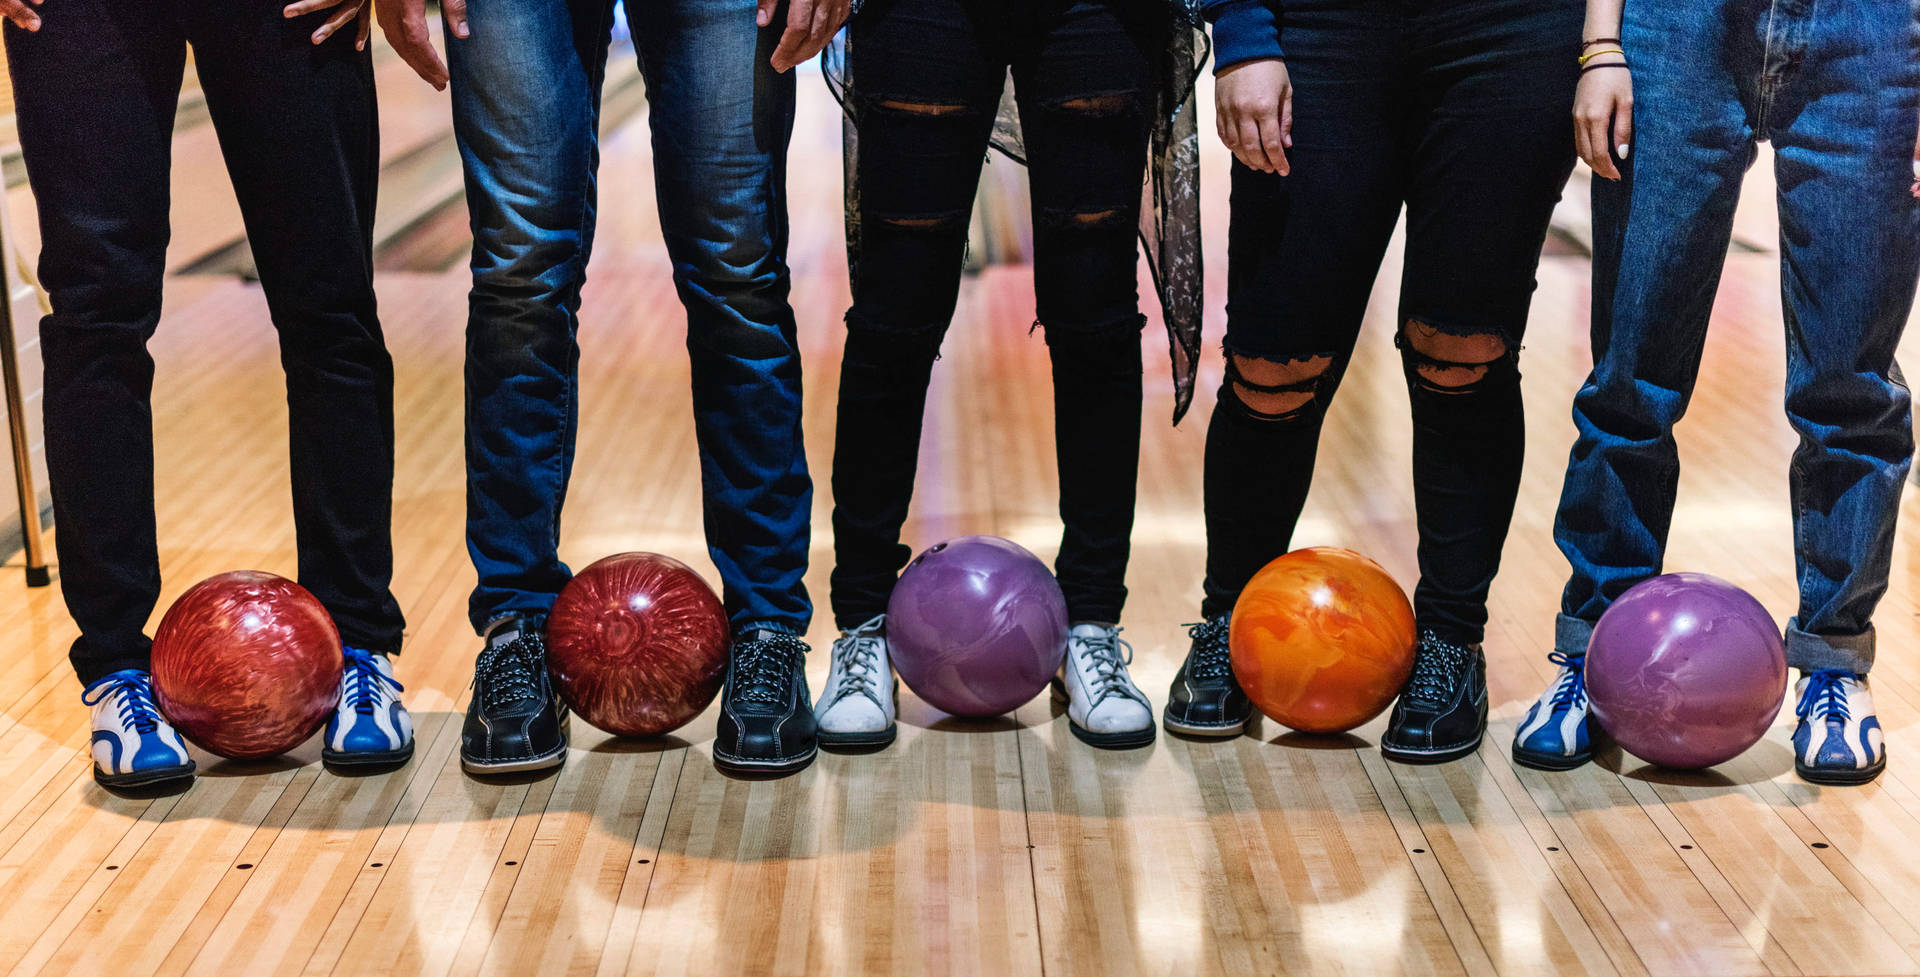 Bowling With Friends Wallpaper